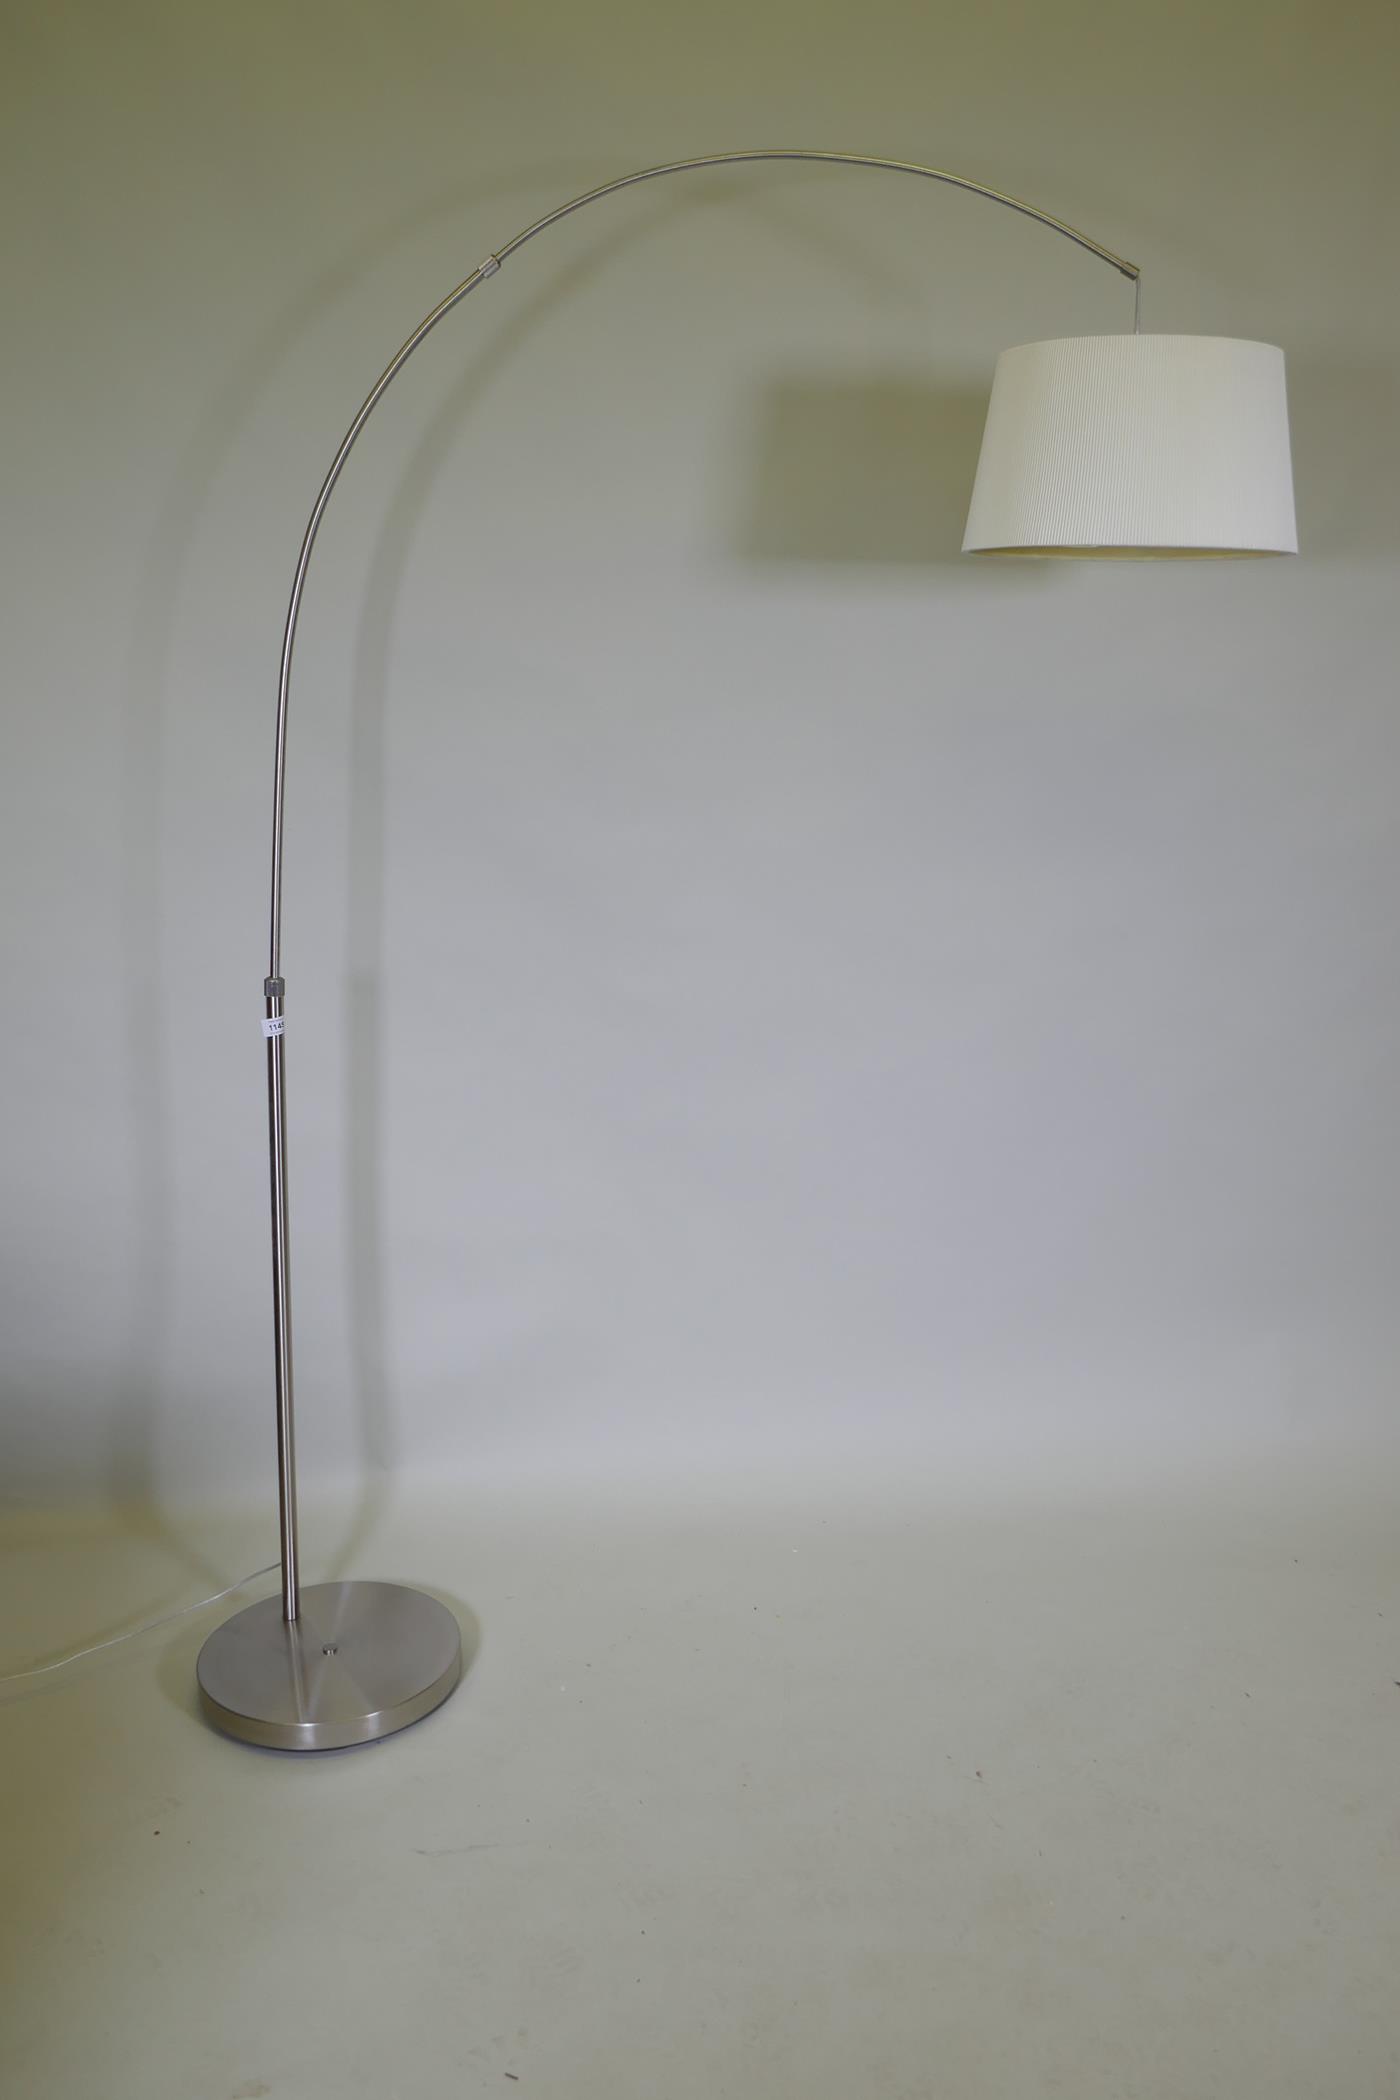 A contemporary brushed steel floor lamp, 180cm high - Image 2 of 2